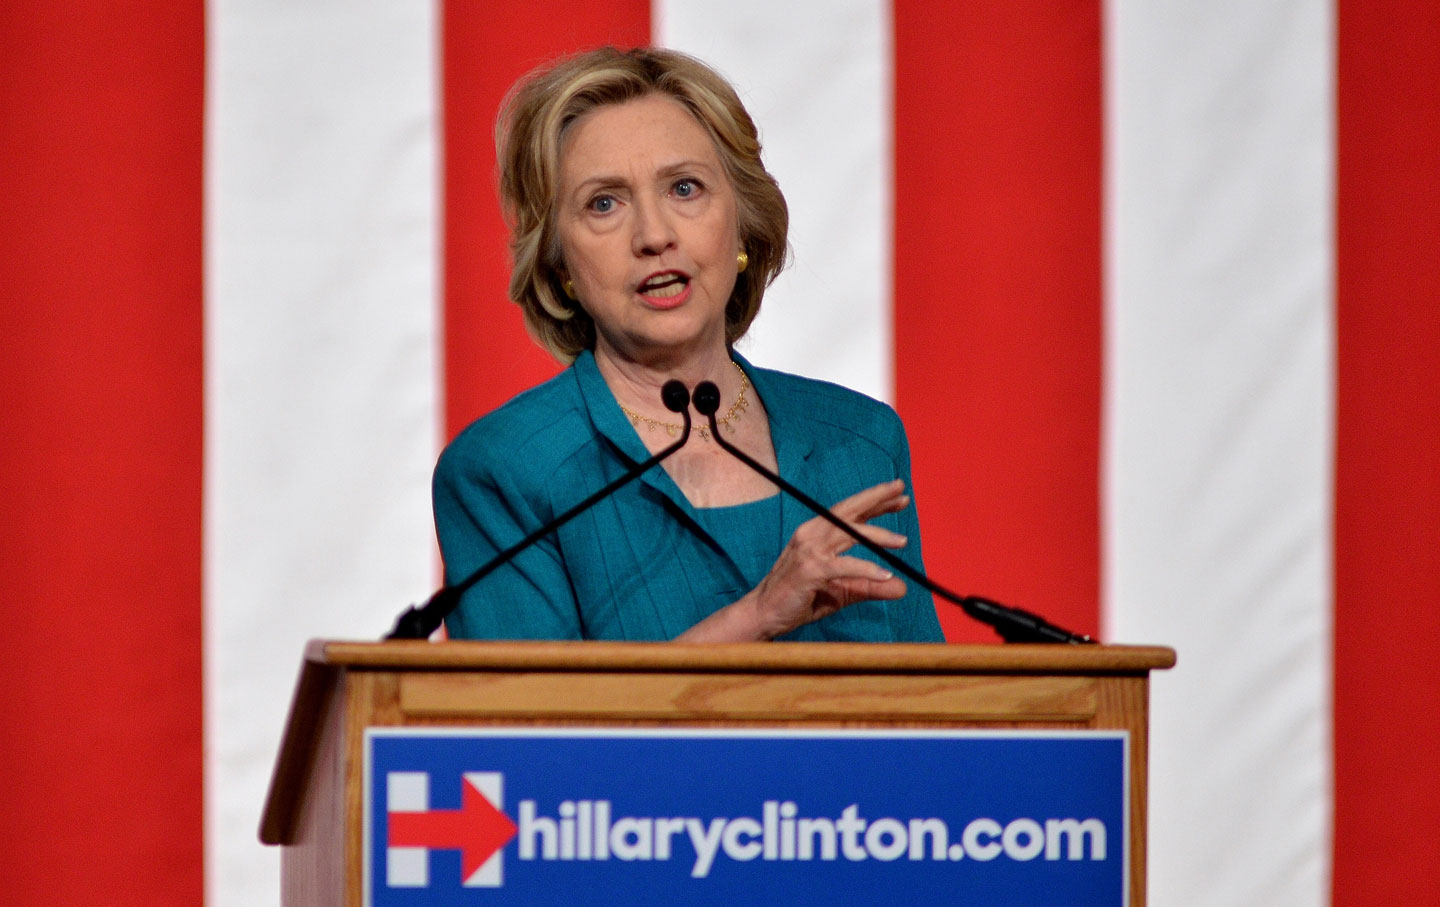 Hillary Clinton Just Made Passage of the TPP Much More Difficult